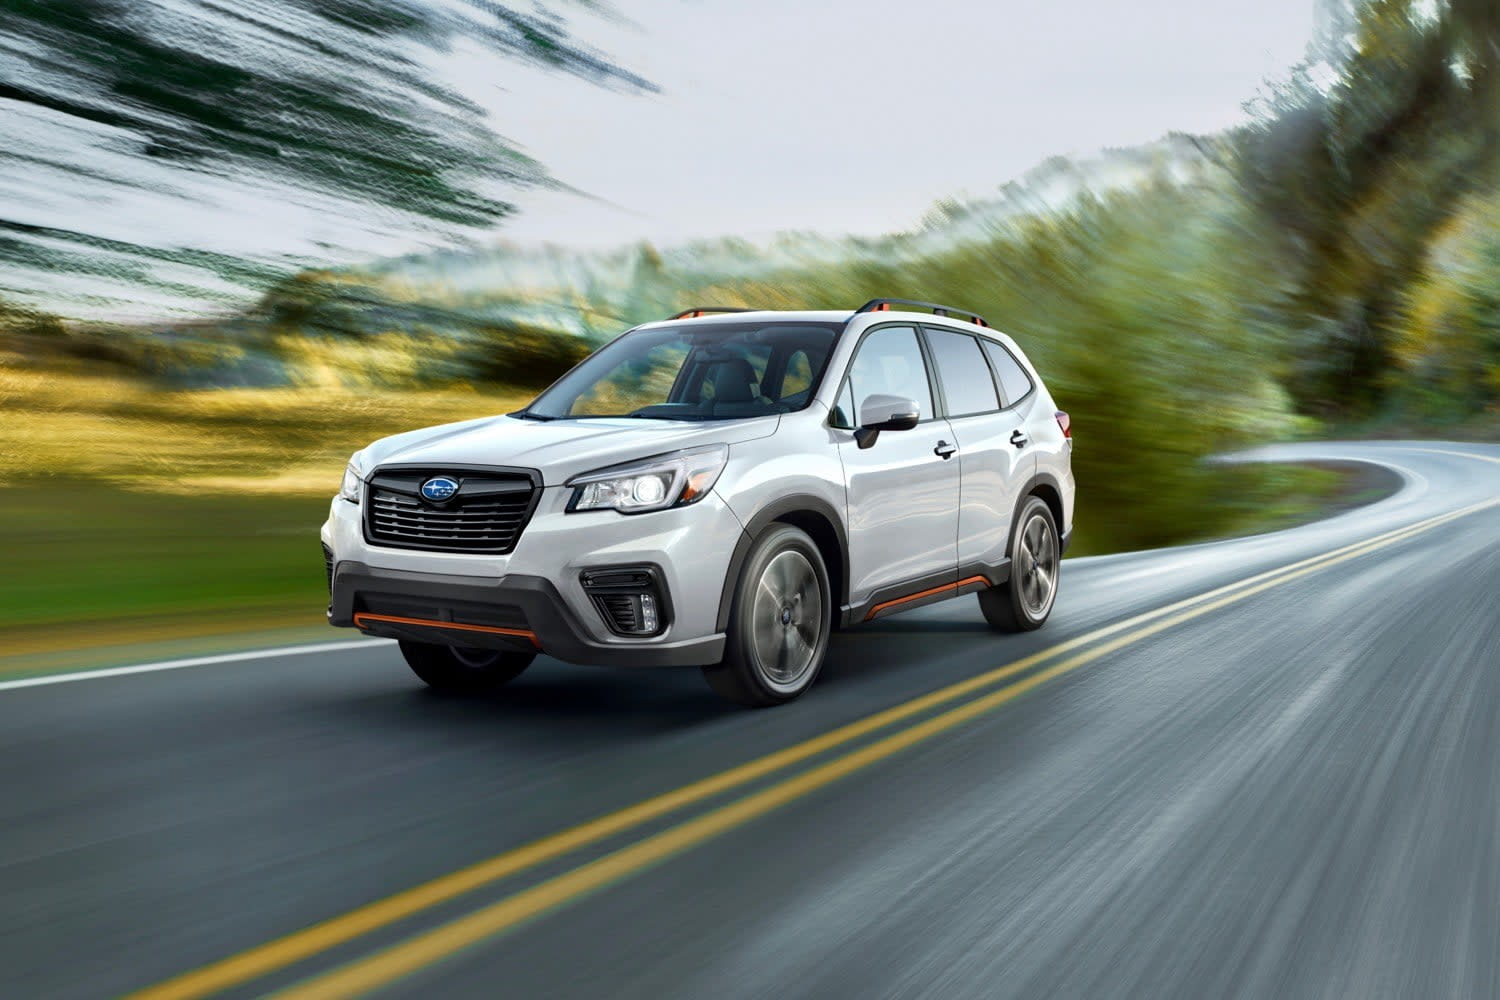 Redesigned 2019 Subaru Forester crossover starts at $25K, hits showrooms in fall1500 x 1000